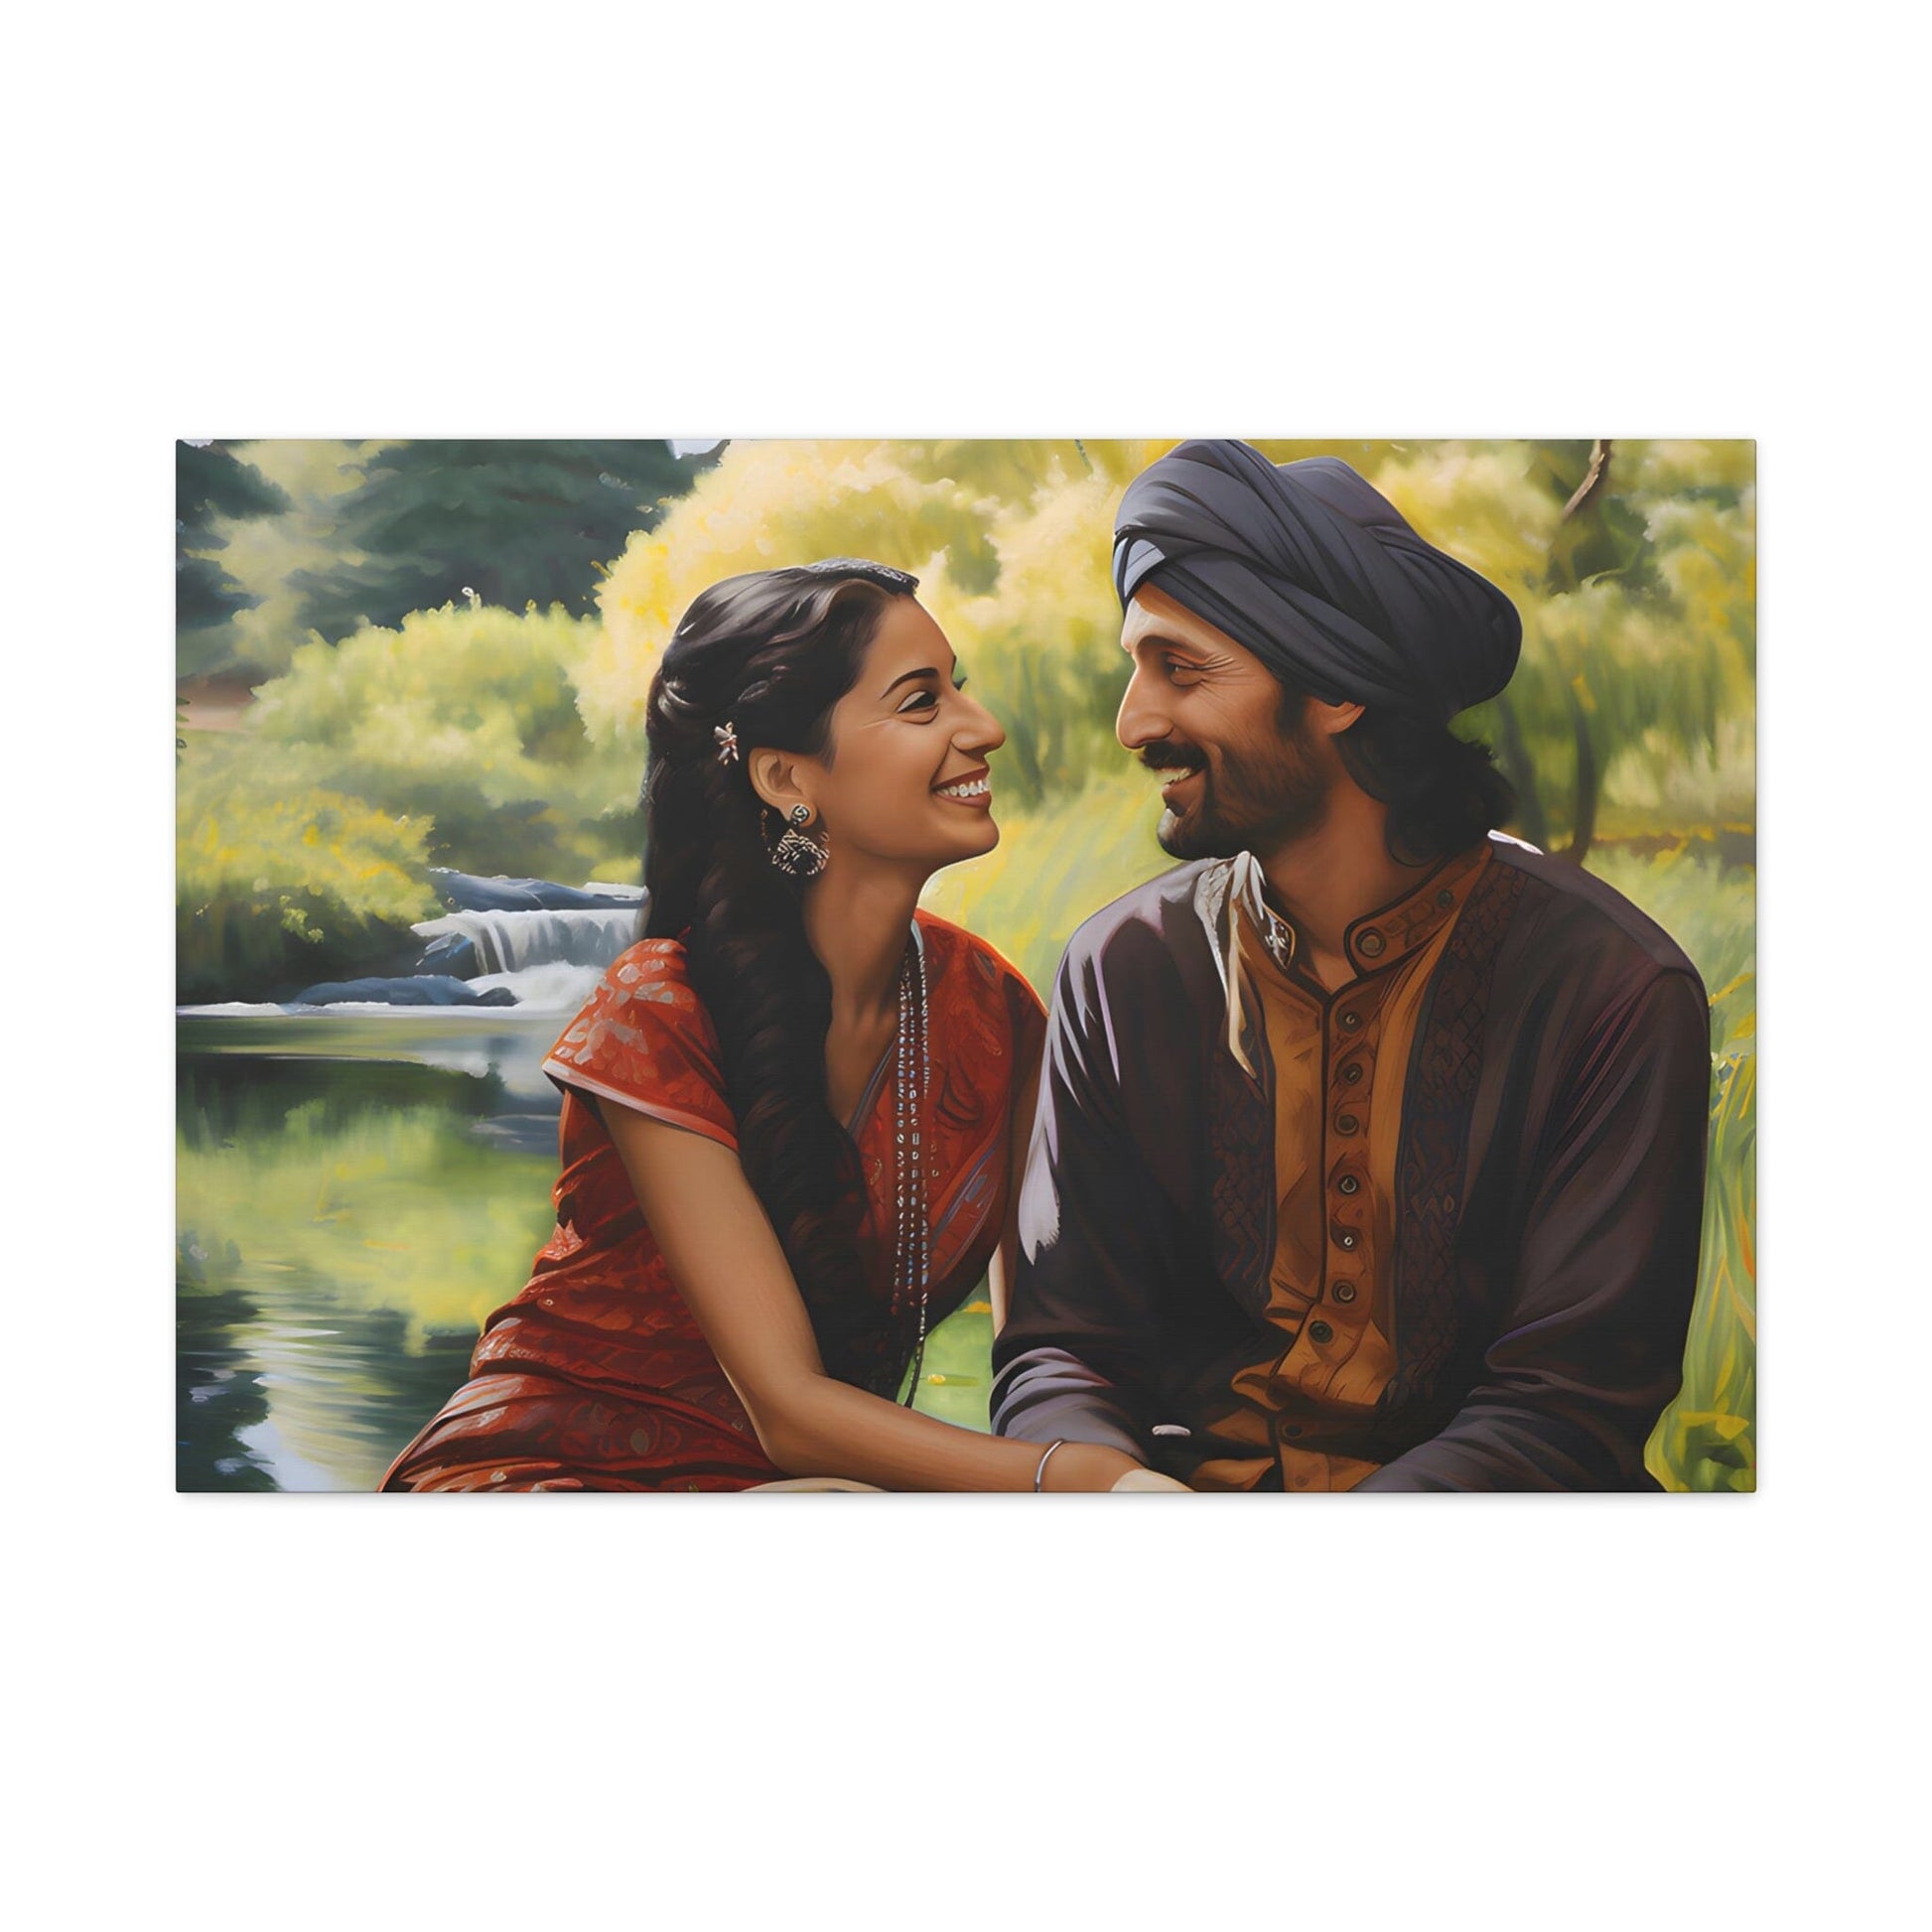 image 6 Canvas by Aravind Patel depicting a young Indian couple enjoying a serene moment in a park, surrounded by tall trees and a reflective pond, capturing the essence of romantic serenity.